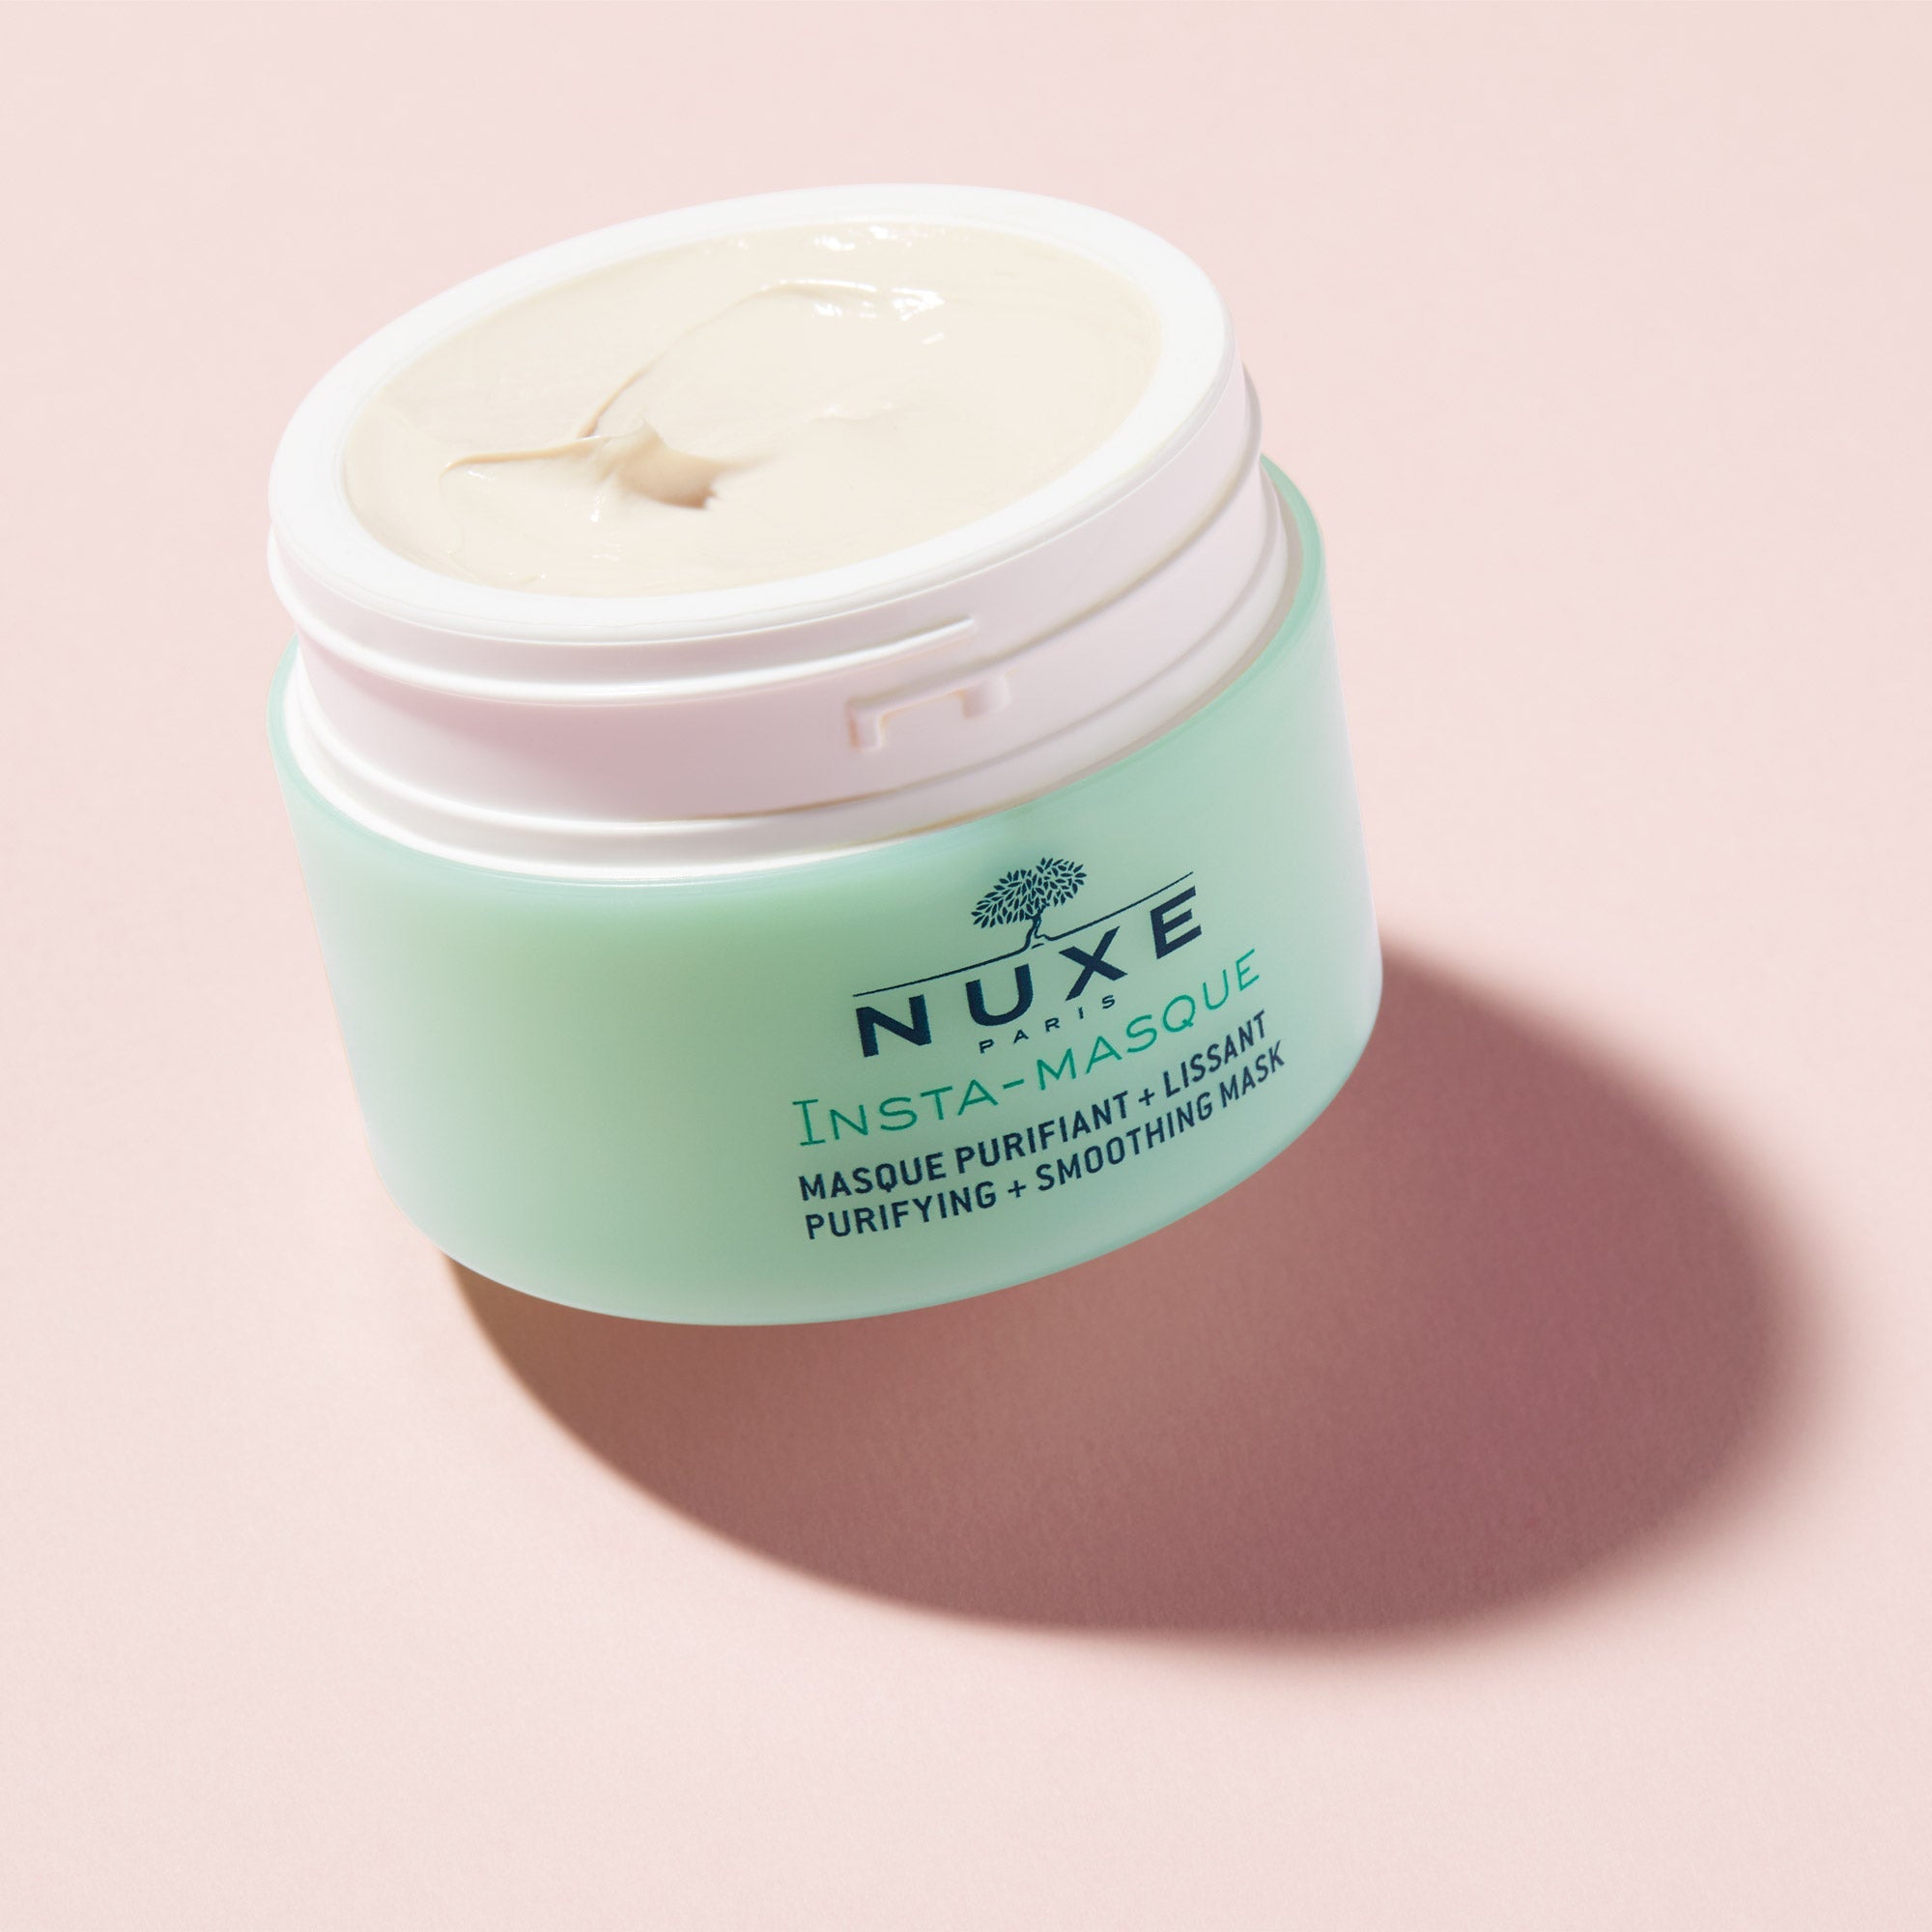 Nuxe Insta-Masque Purifying + Smoothing Mask 50 ml